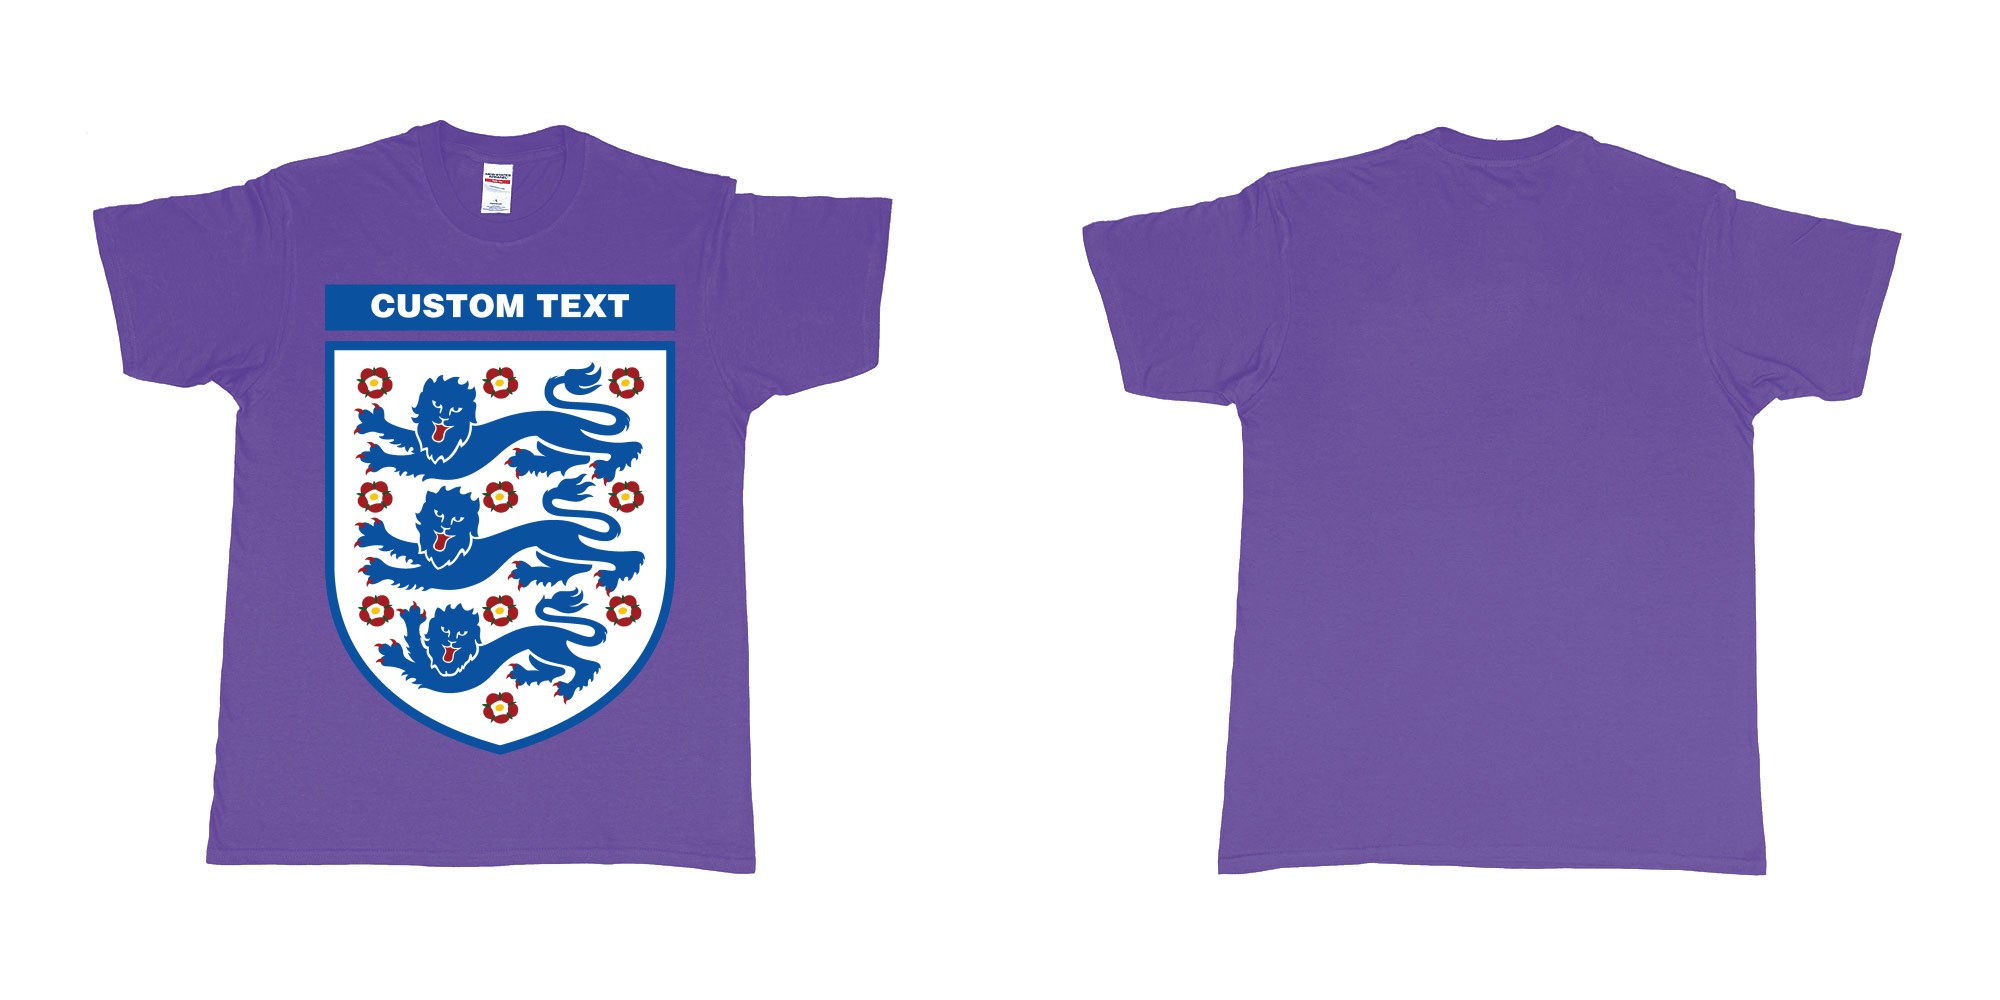 Custom tshirt design england national football team logo in fabric color purple choice your own text made in Bali by The Pirate Way